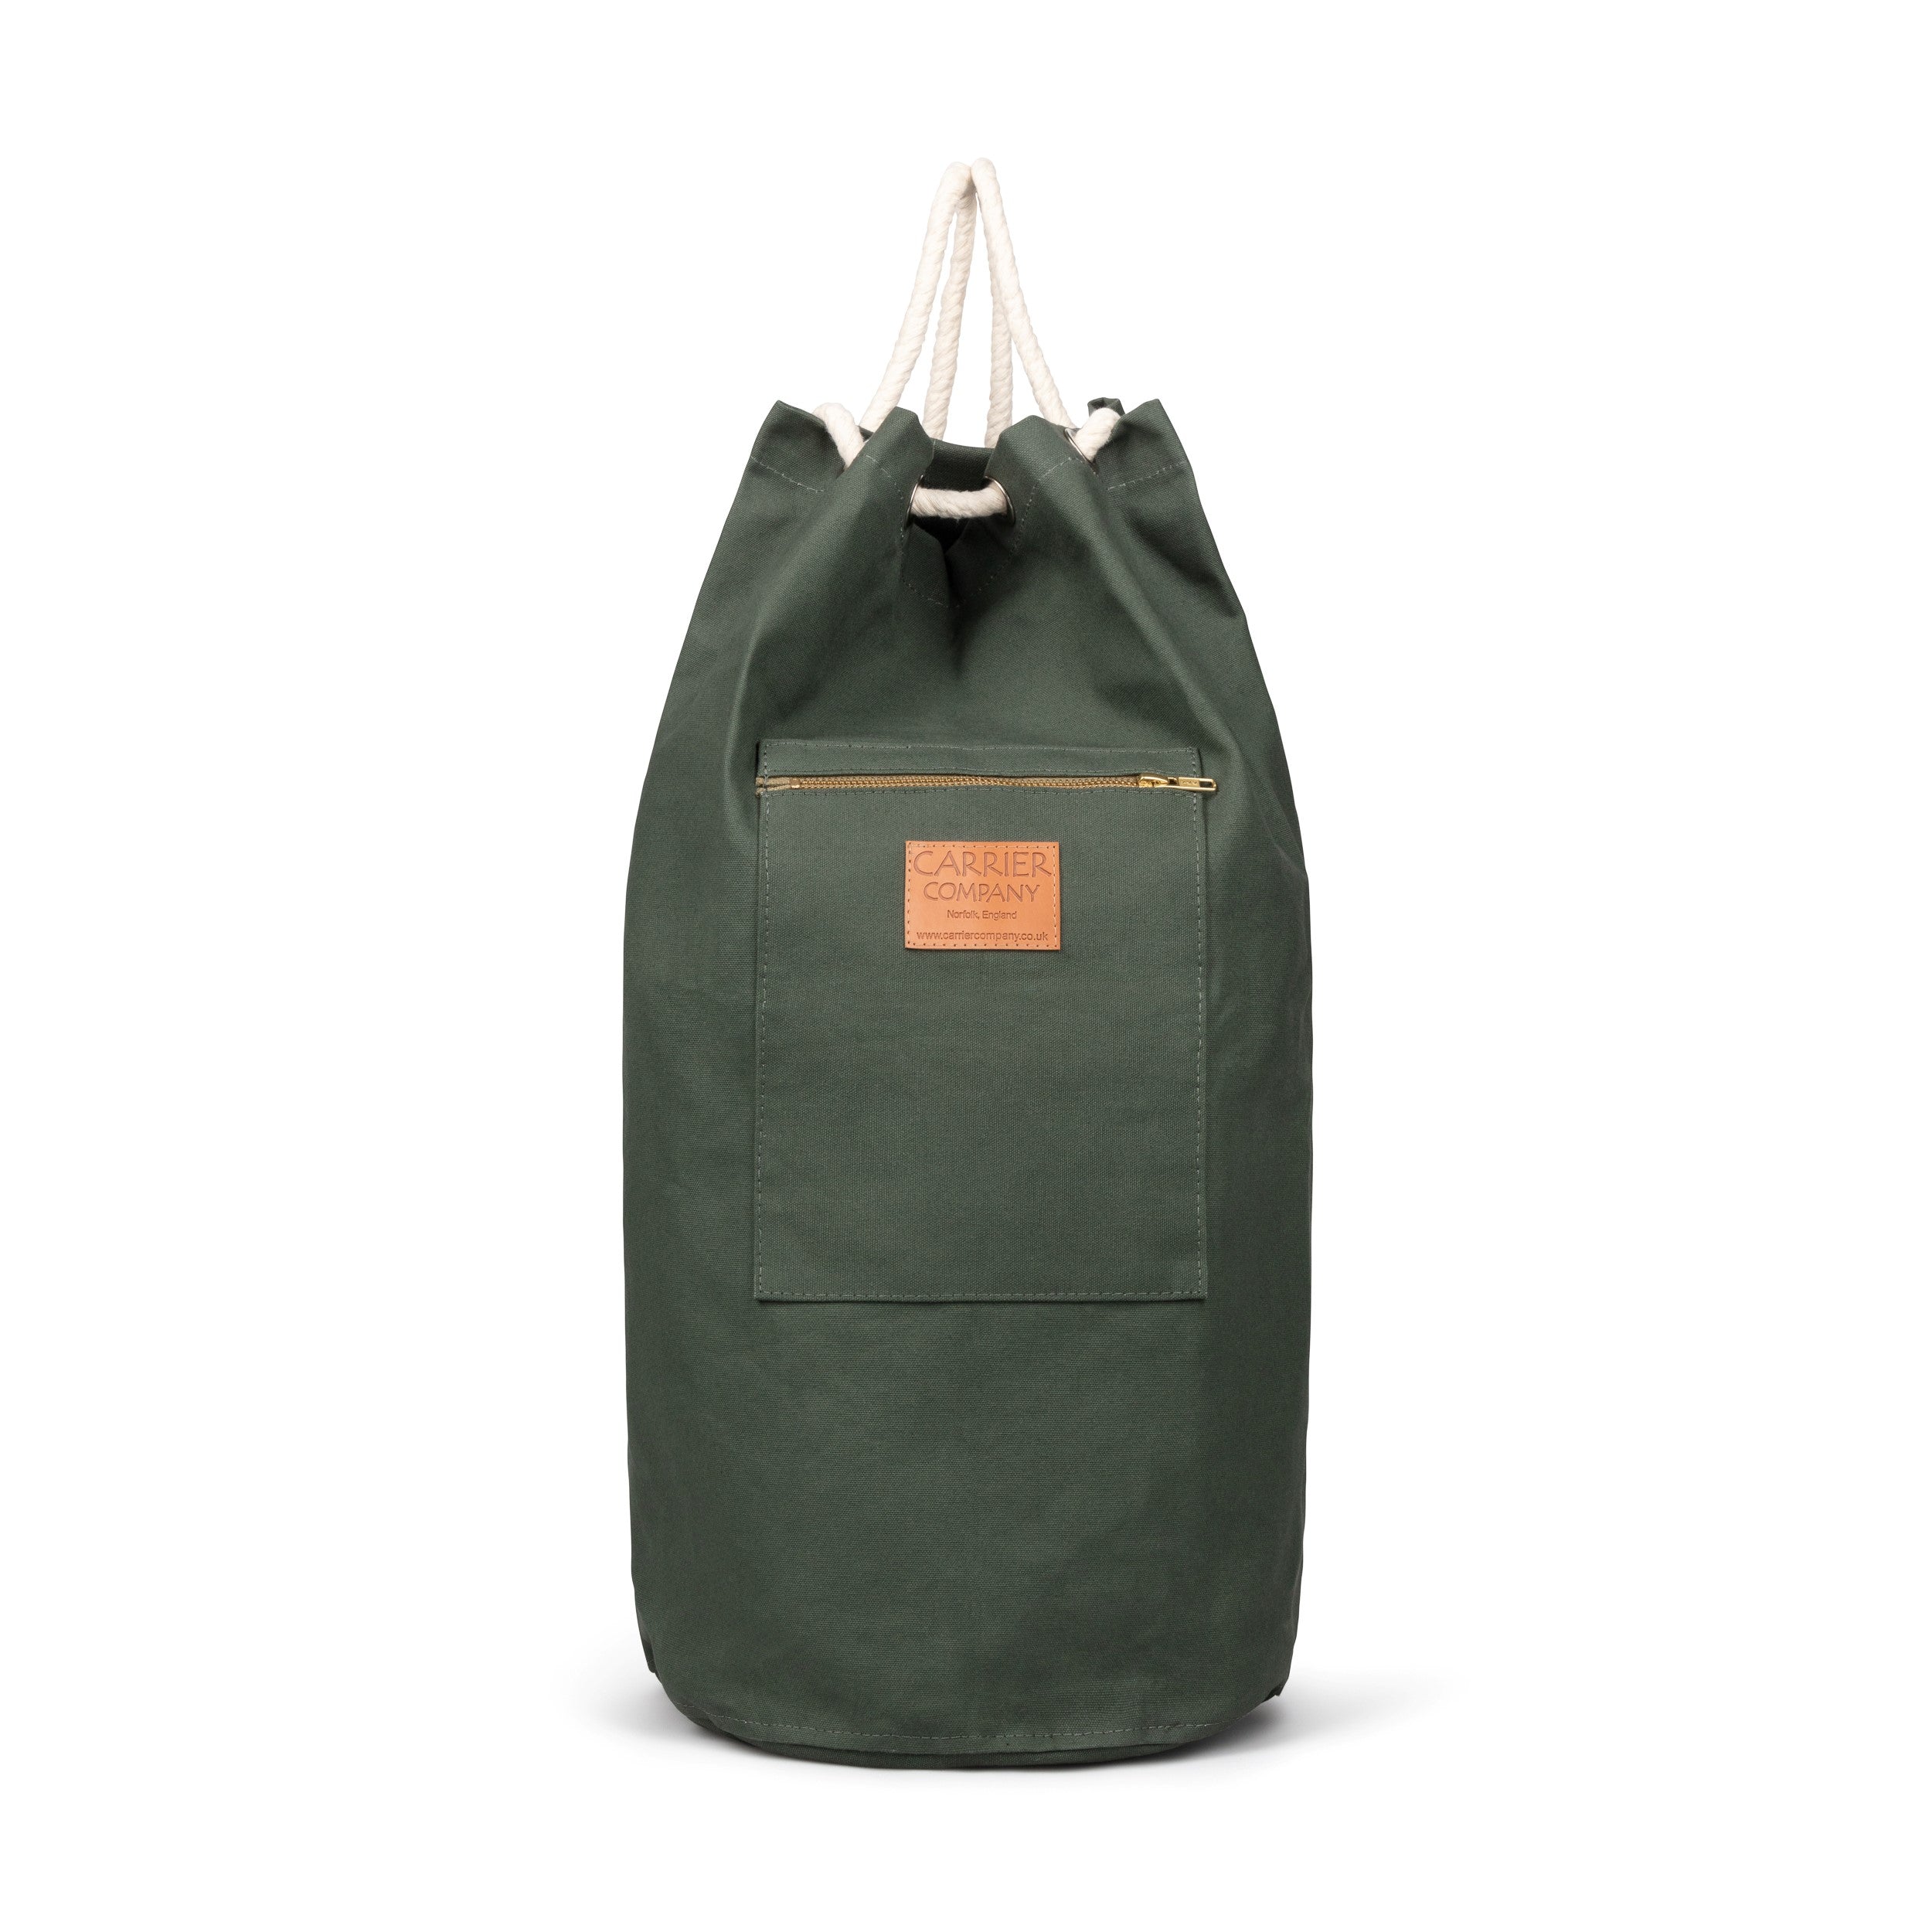 Carrier Company Duffle Bag in Spruce Green